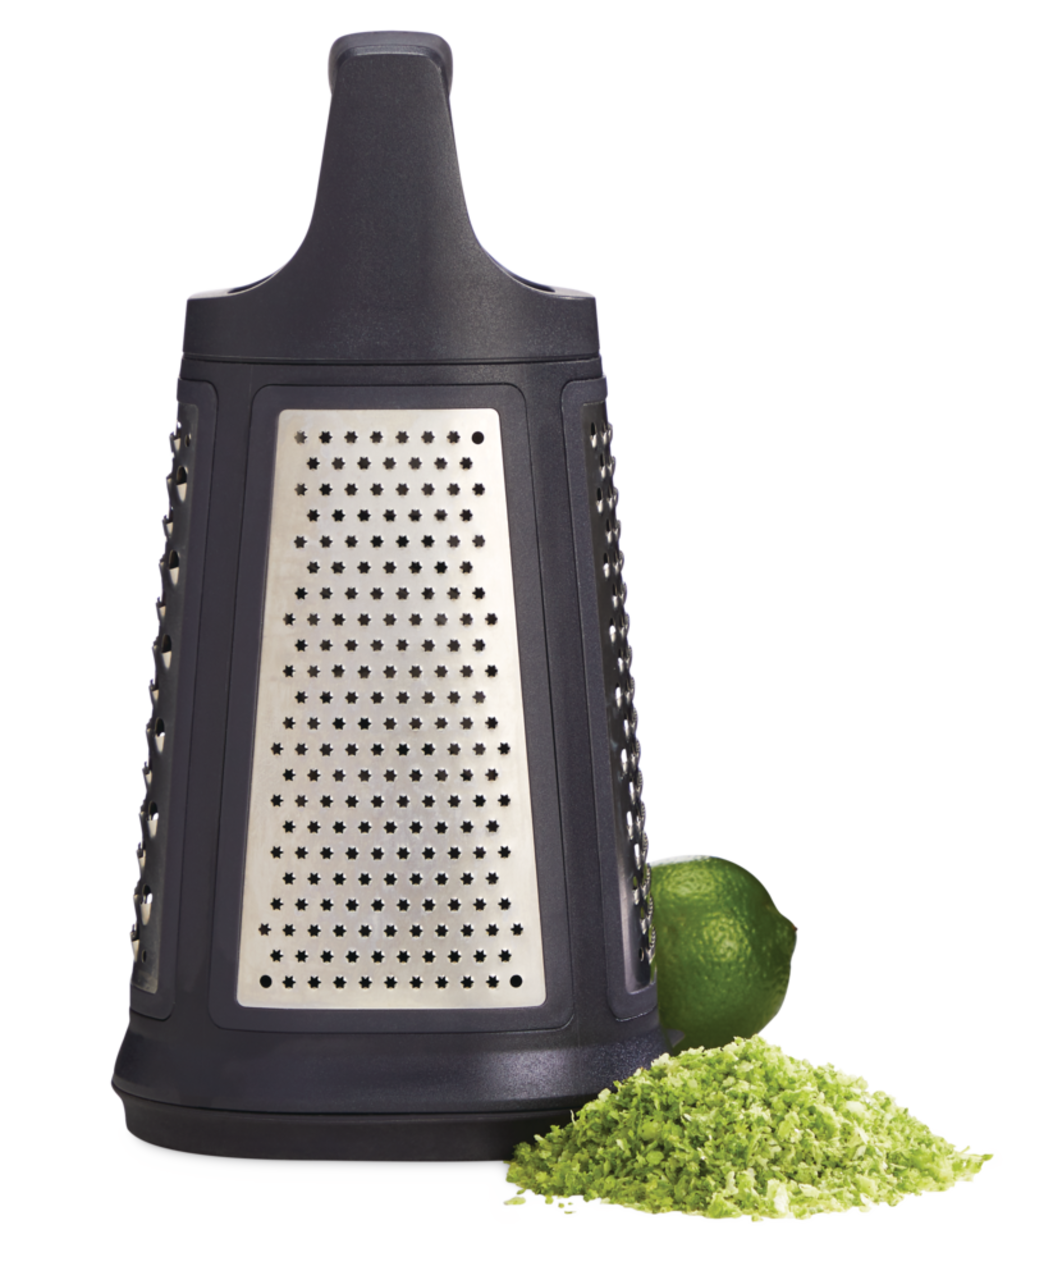 https://media-www.canadiantire.ca/product/living/kitchen/kitchen-tools-thermometers/1426627/paderno-box-grater-bc2fab68-7942-4a49-ad9e-93631fbbc8f7.png?imdensity=1&imwidth=1244&impolicy=mZoom